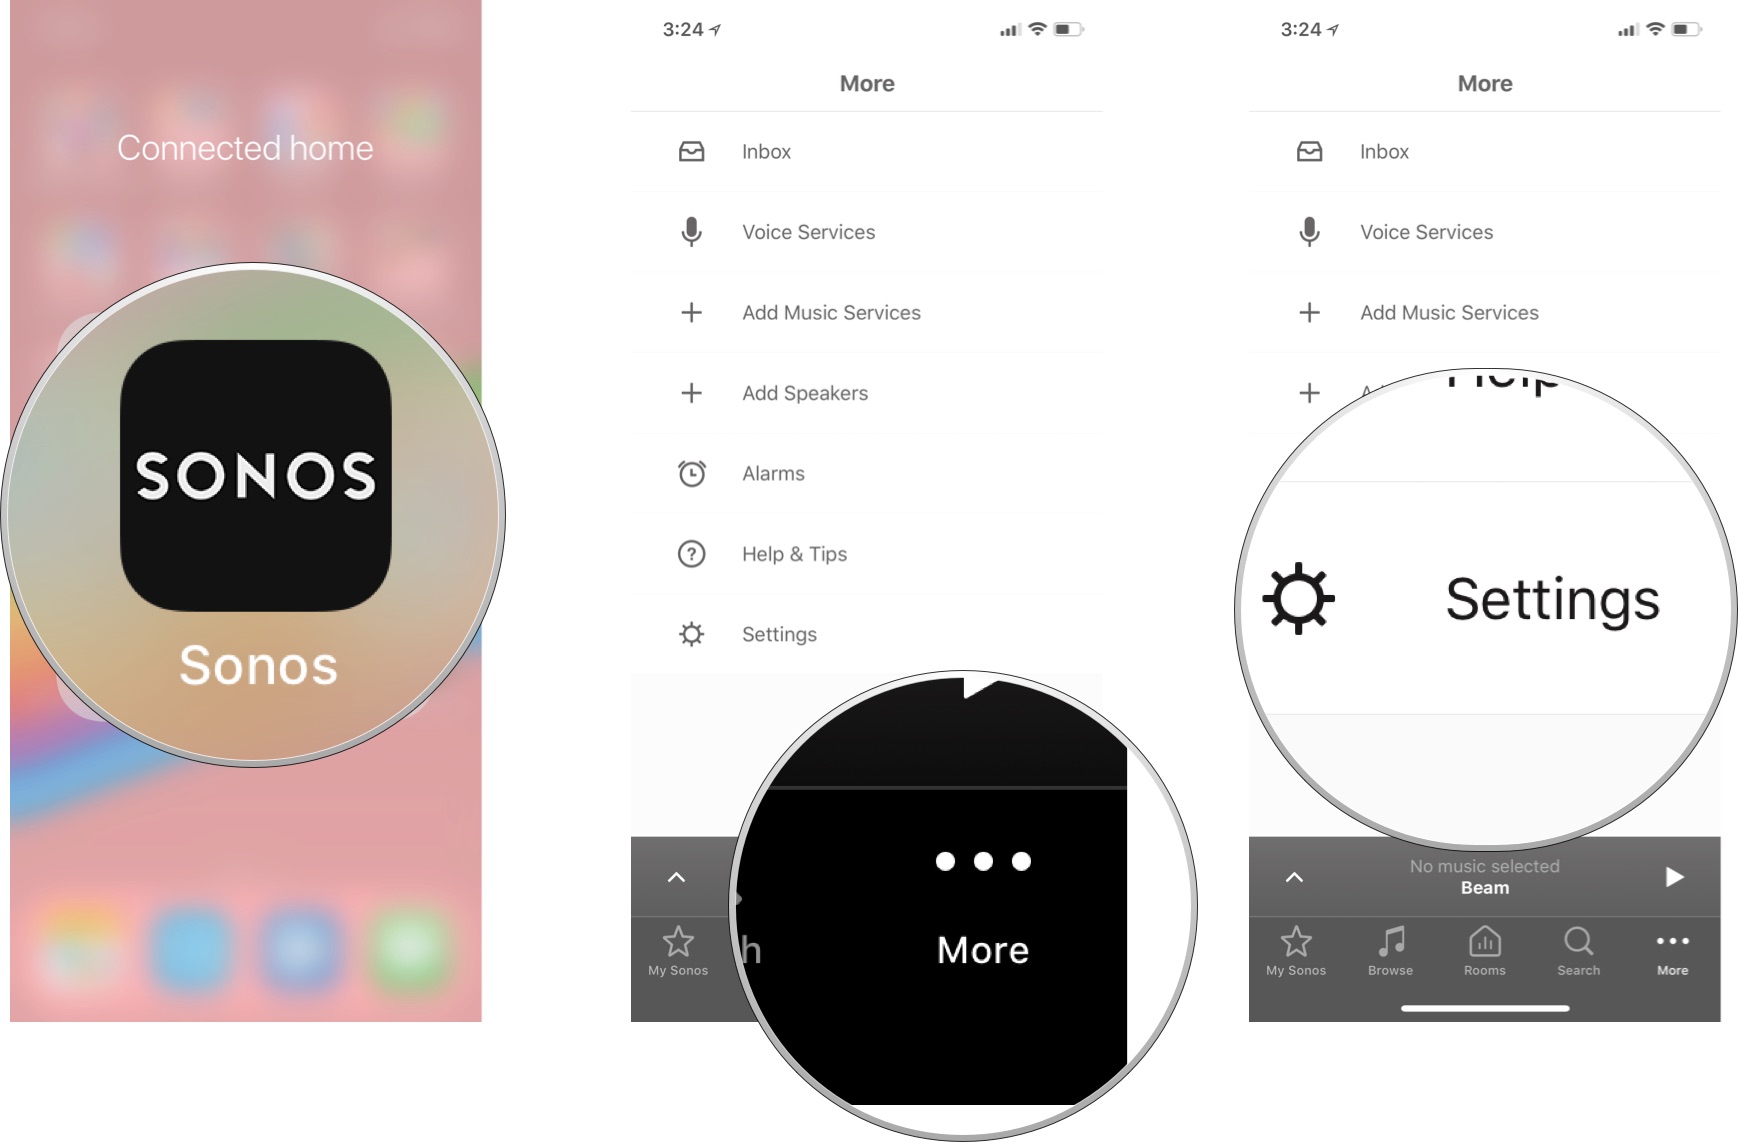 Launch the Sonos app, then tap More, then tap Settings